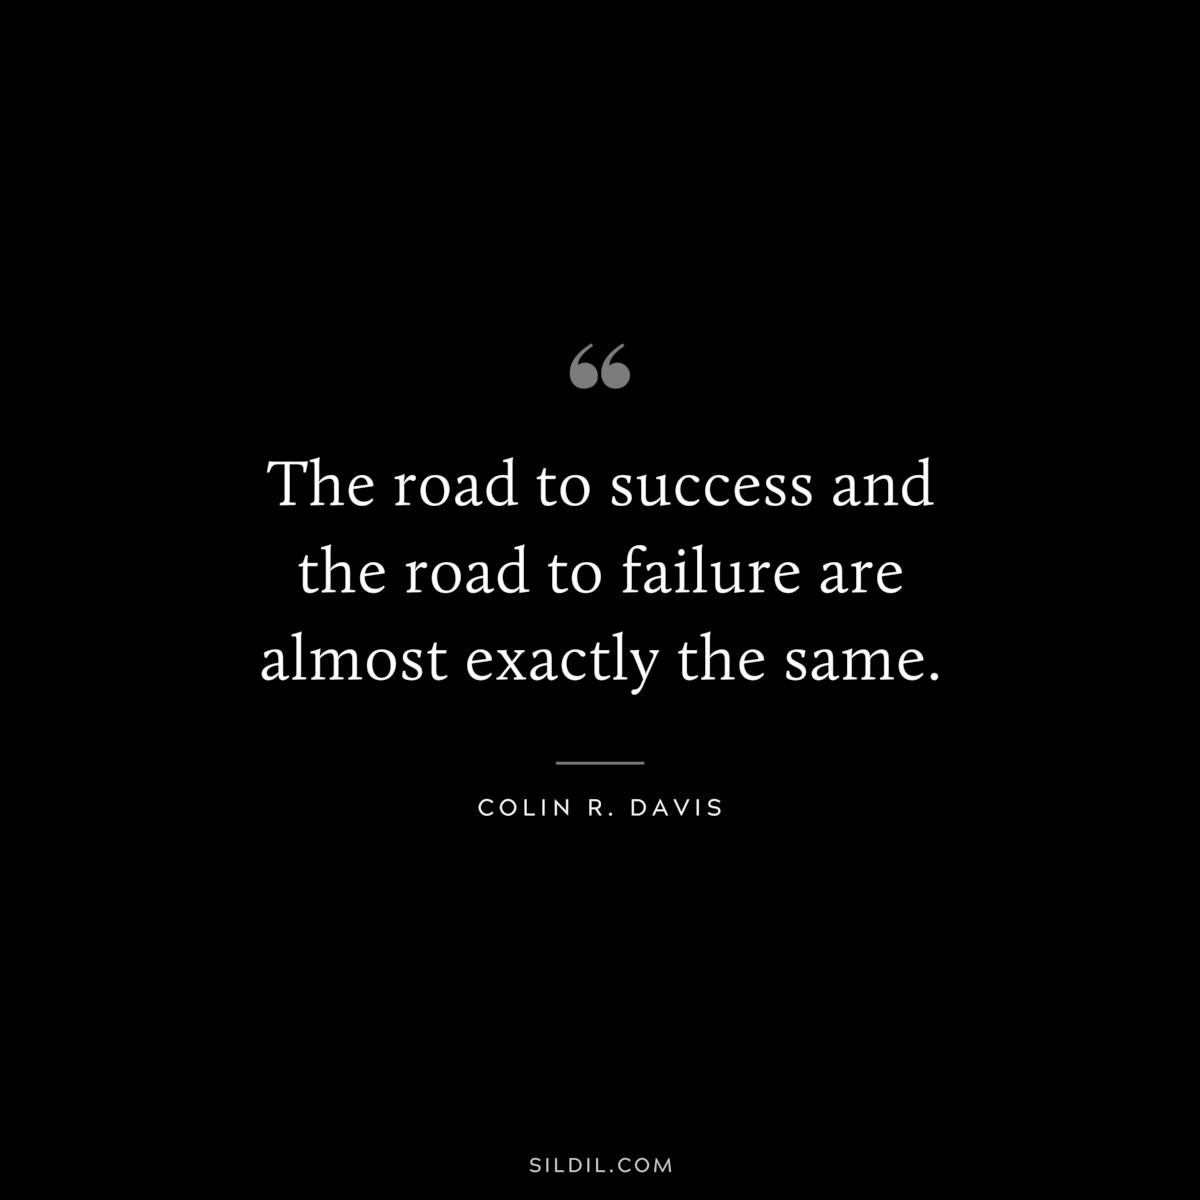 The road to success and the road to failure are almost exactly the same. ― Colin R. Davis